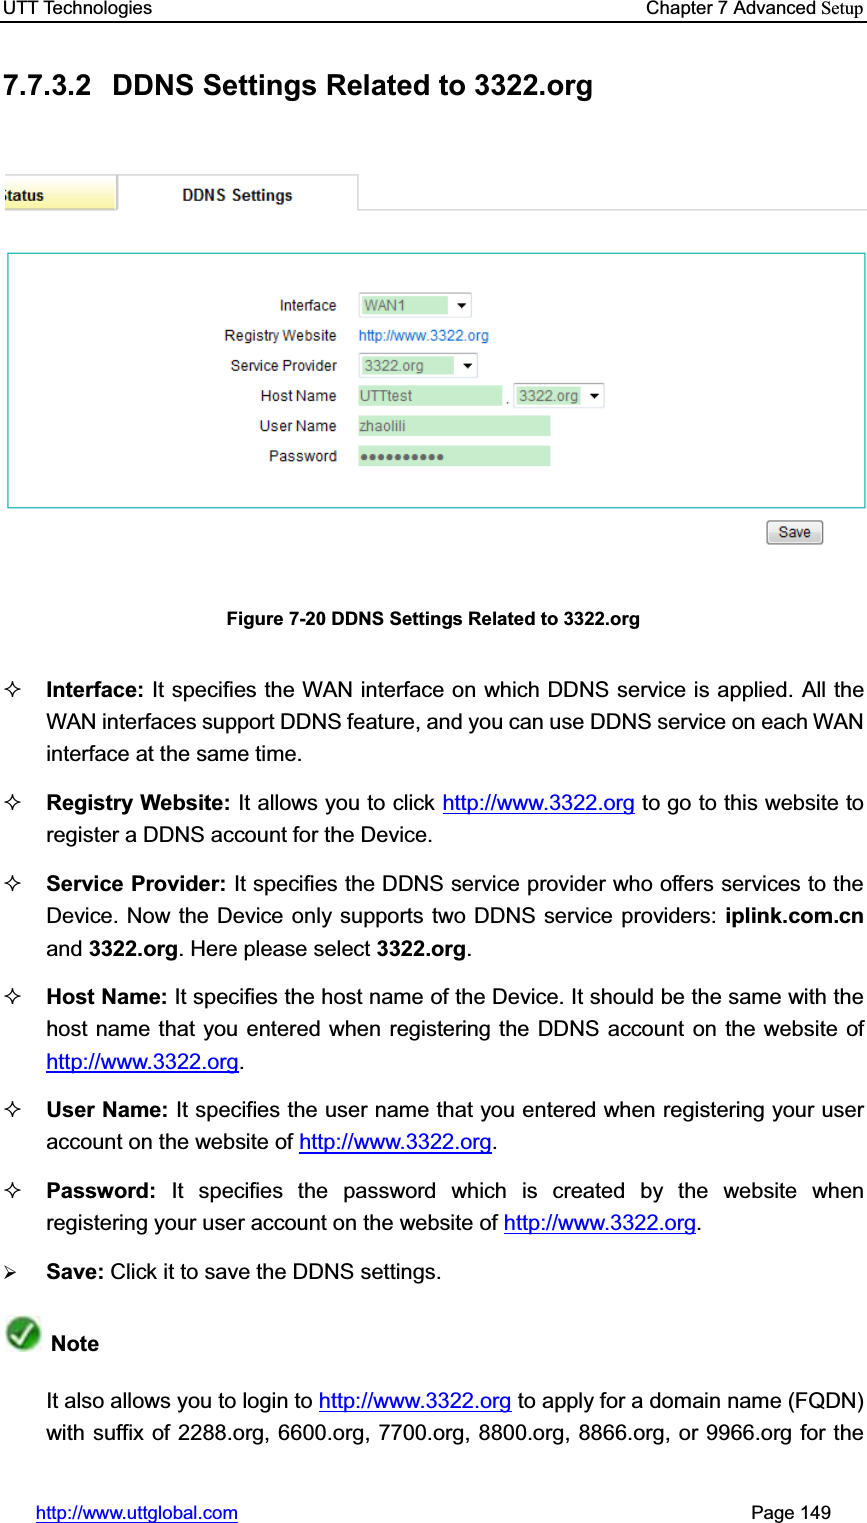 UTT Technologies    Chapter 7 Advanced Setuphttp://www.uttglobal.com                                                       Page 149 7.7.3.2  DDNS Settings Related to 3322.org Figure 7-20 DDNS Settings Related to 3322.org Interface: It specifies the WAN interface on which DDNS service is applied. All the WAN interfaces support DDNS feature, and you can use DDNS service on each WAN interface at the same time.   Registry Website: It allows you to click http://www.3322.org to go to this website to register a DDNS account for the Device. Service Provider: It specifies the DDNS service provider who offers services to the Device. Now the Device only supports two DDNS service providers: iplink.com.cnand 3322.org. Here please select 3322.org.Host Name: It specifies the host name of the Device. It should be the same with the host name that you entered when registering the DDNS account on the website ofhttp://www.3322.org.User Name: It specifies the user name that you entered when registering your user account on the website of http://www.3322.org.Password: It specifies the password which is created by the website when registering your user account on the website of http://www.3322.org.¾Save: Click it to save the DDNS settings.NoteIt also allows you to login to http://www.3322.org to apply for a domain name (FQDN) with suffix of 2288.org, 6600.org, 7700.org, 8800.org, 8866.org, or 9966.org for the 